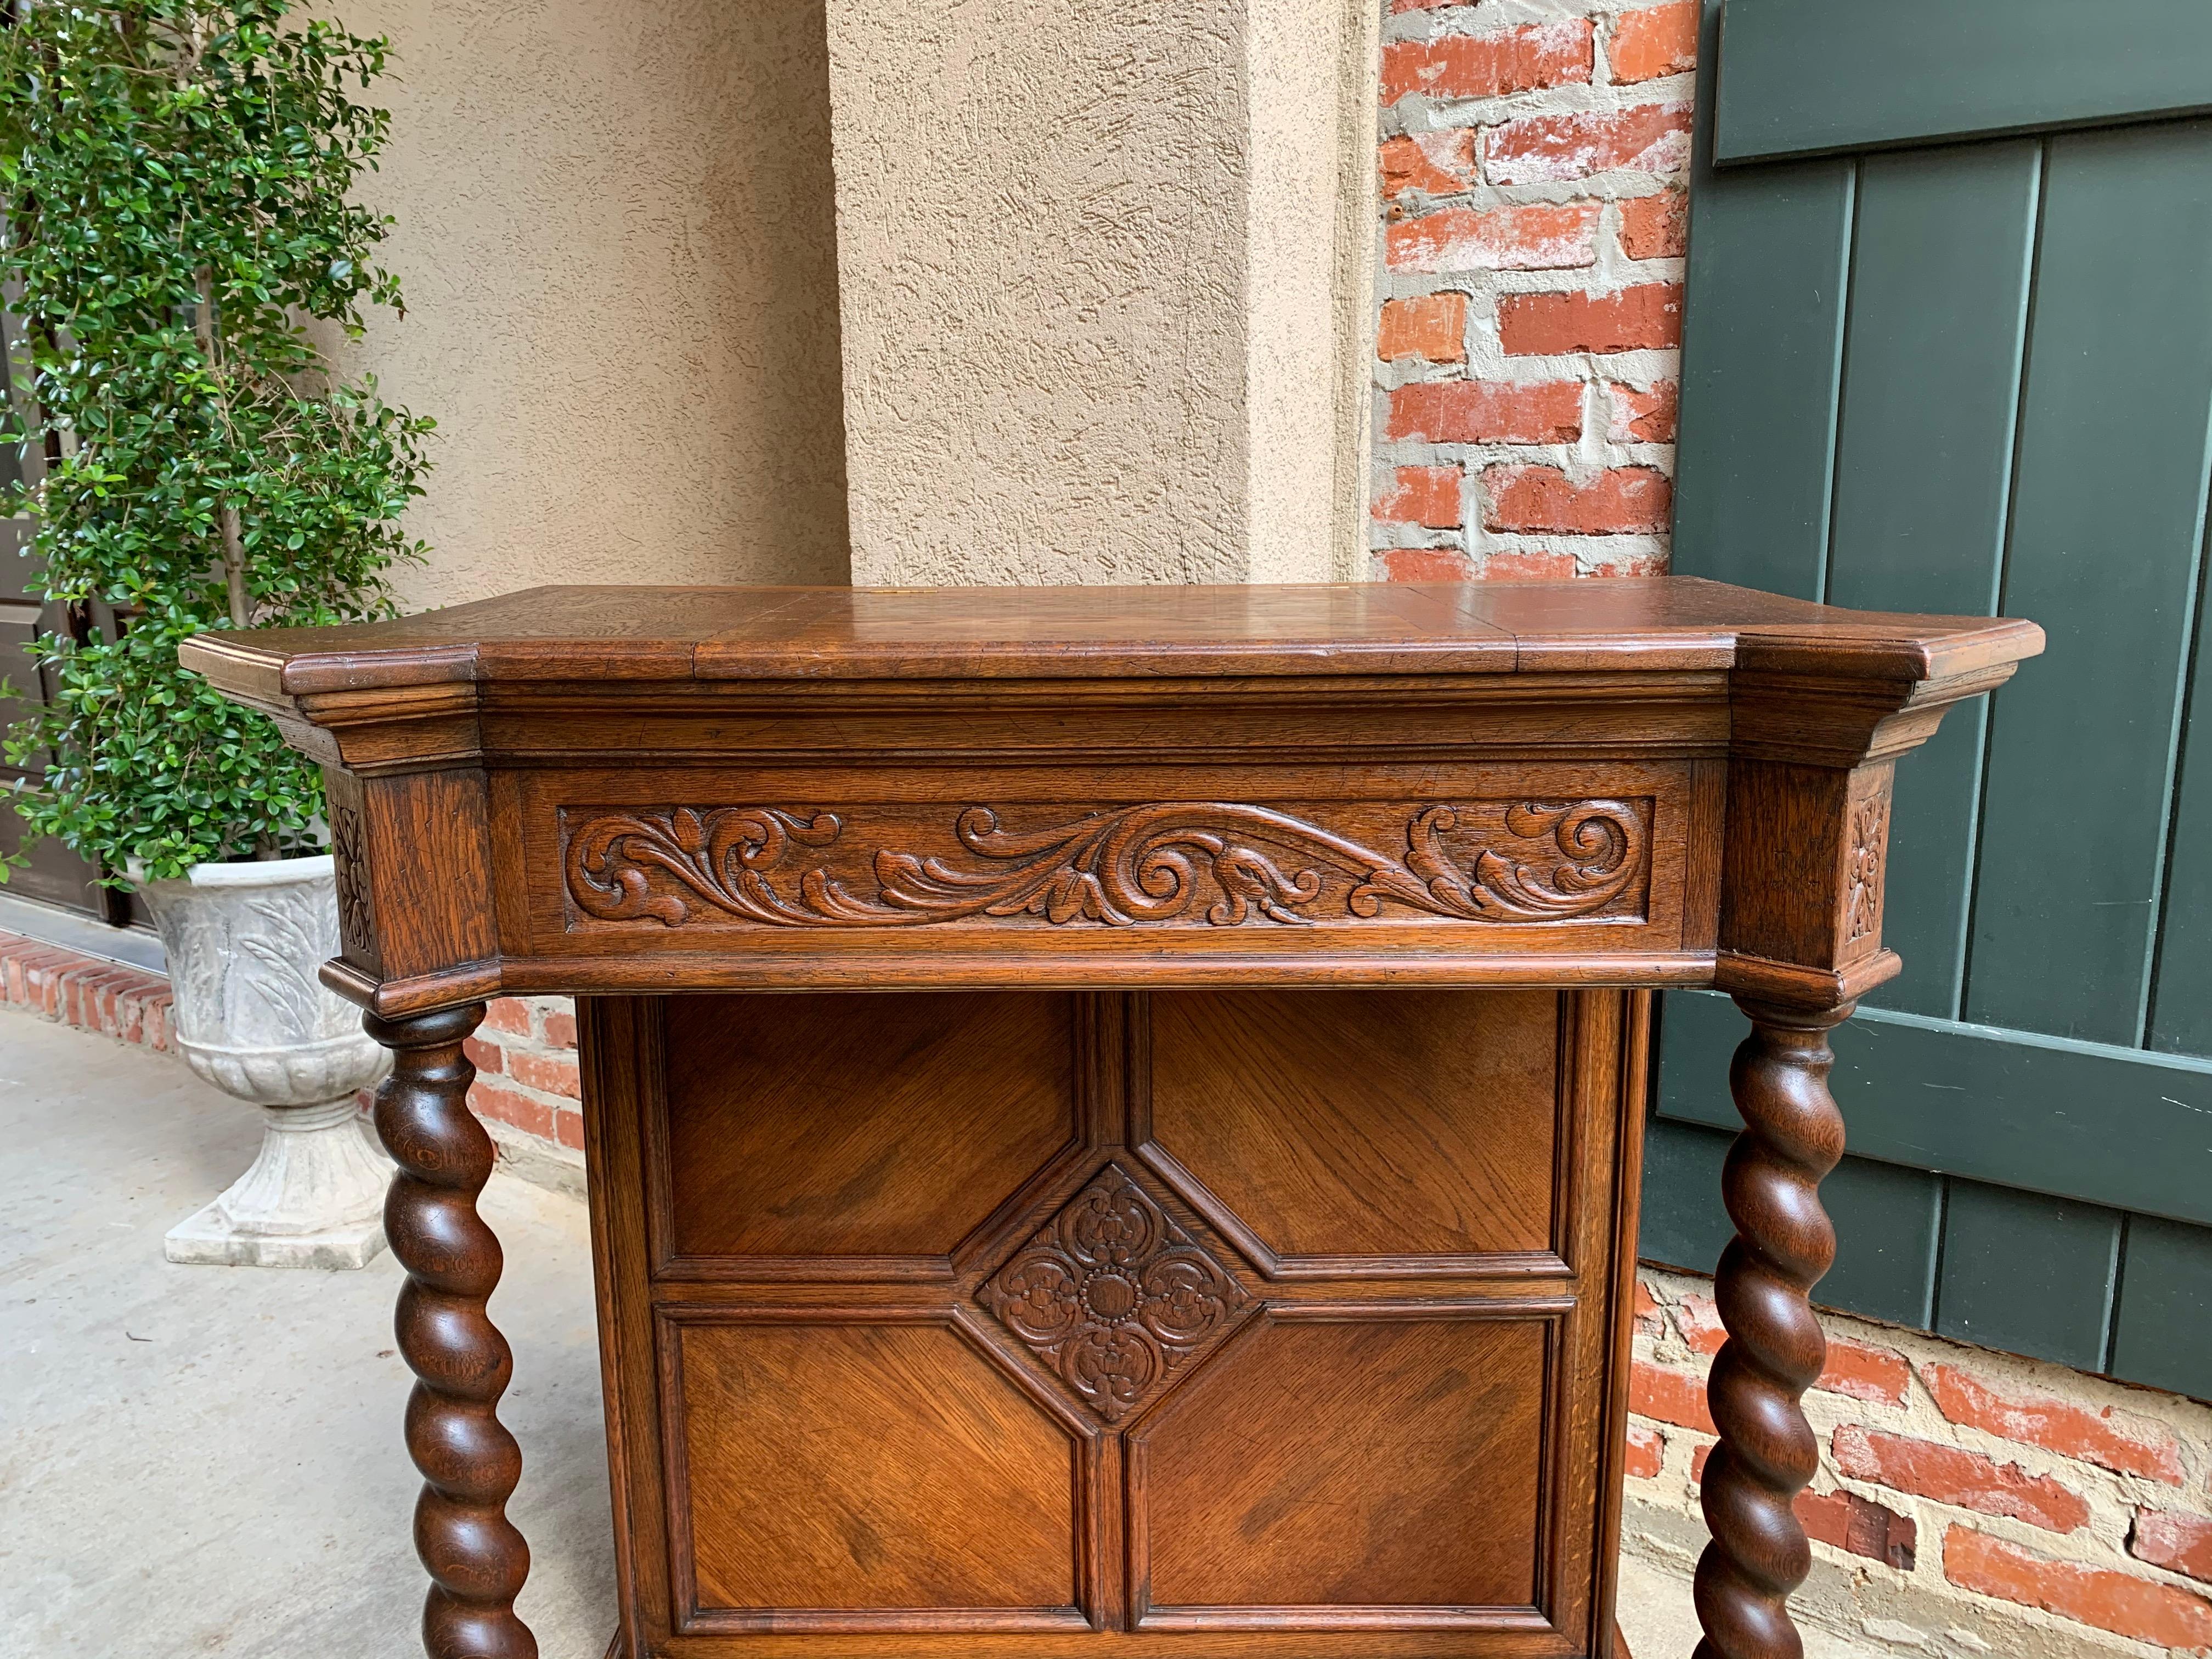 20th Century English Carved Oak Console Hall Table Barley Twist Column Cabinet 1